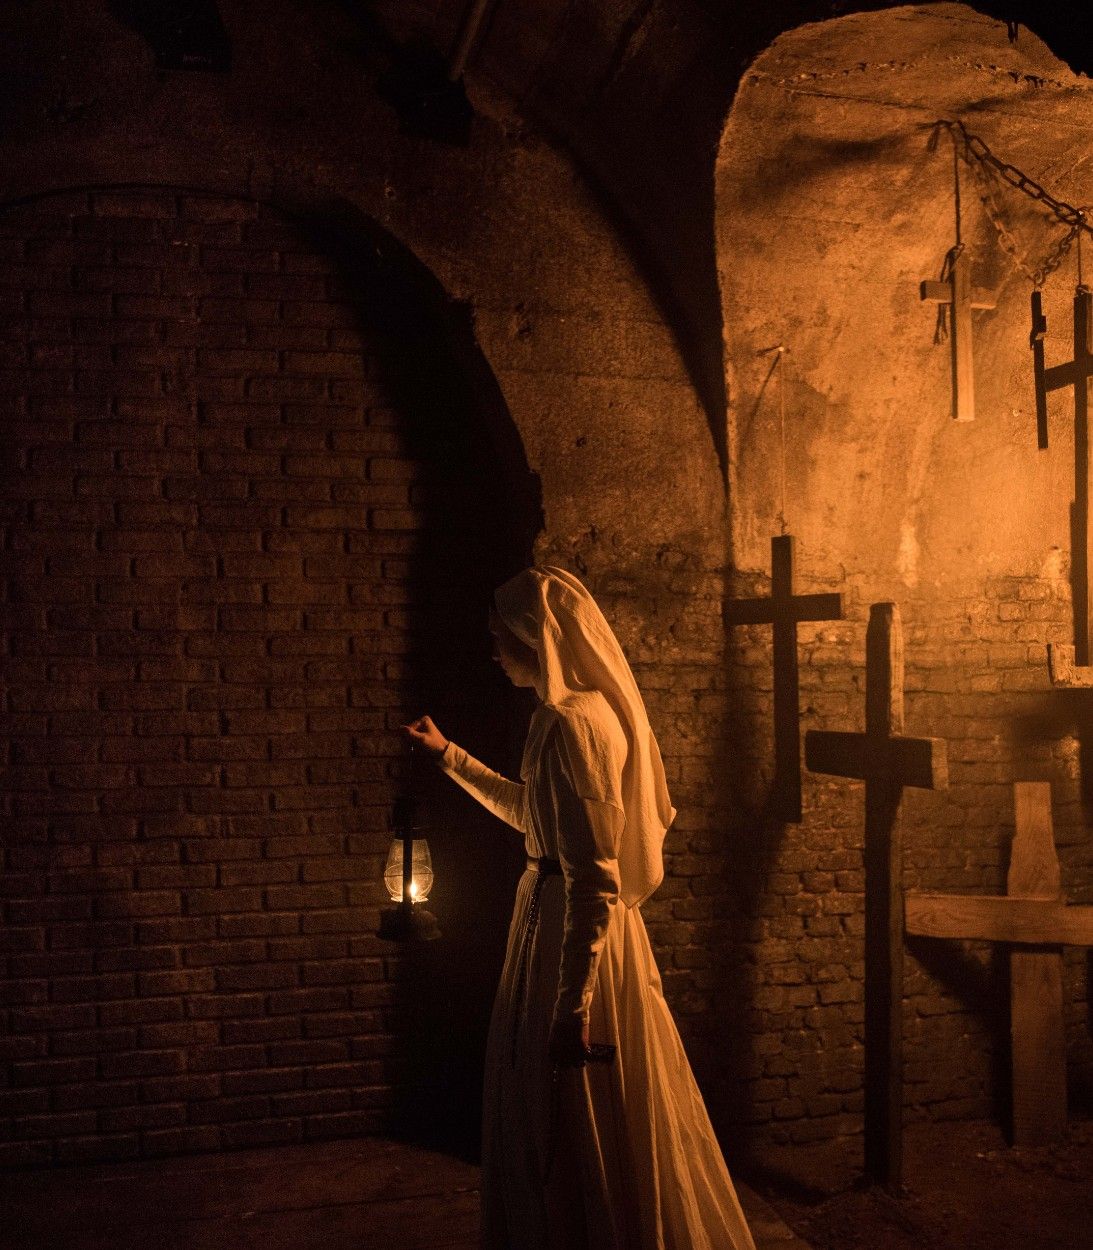 The Abbey in The Nun TLDR